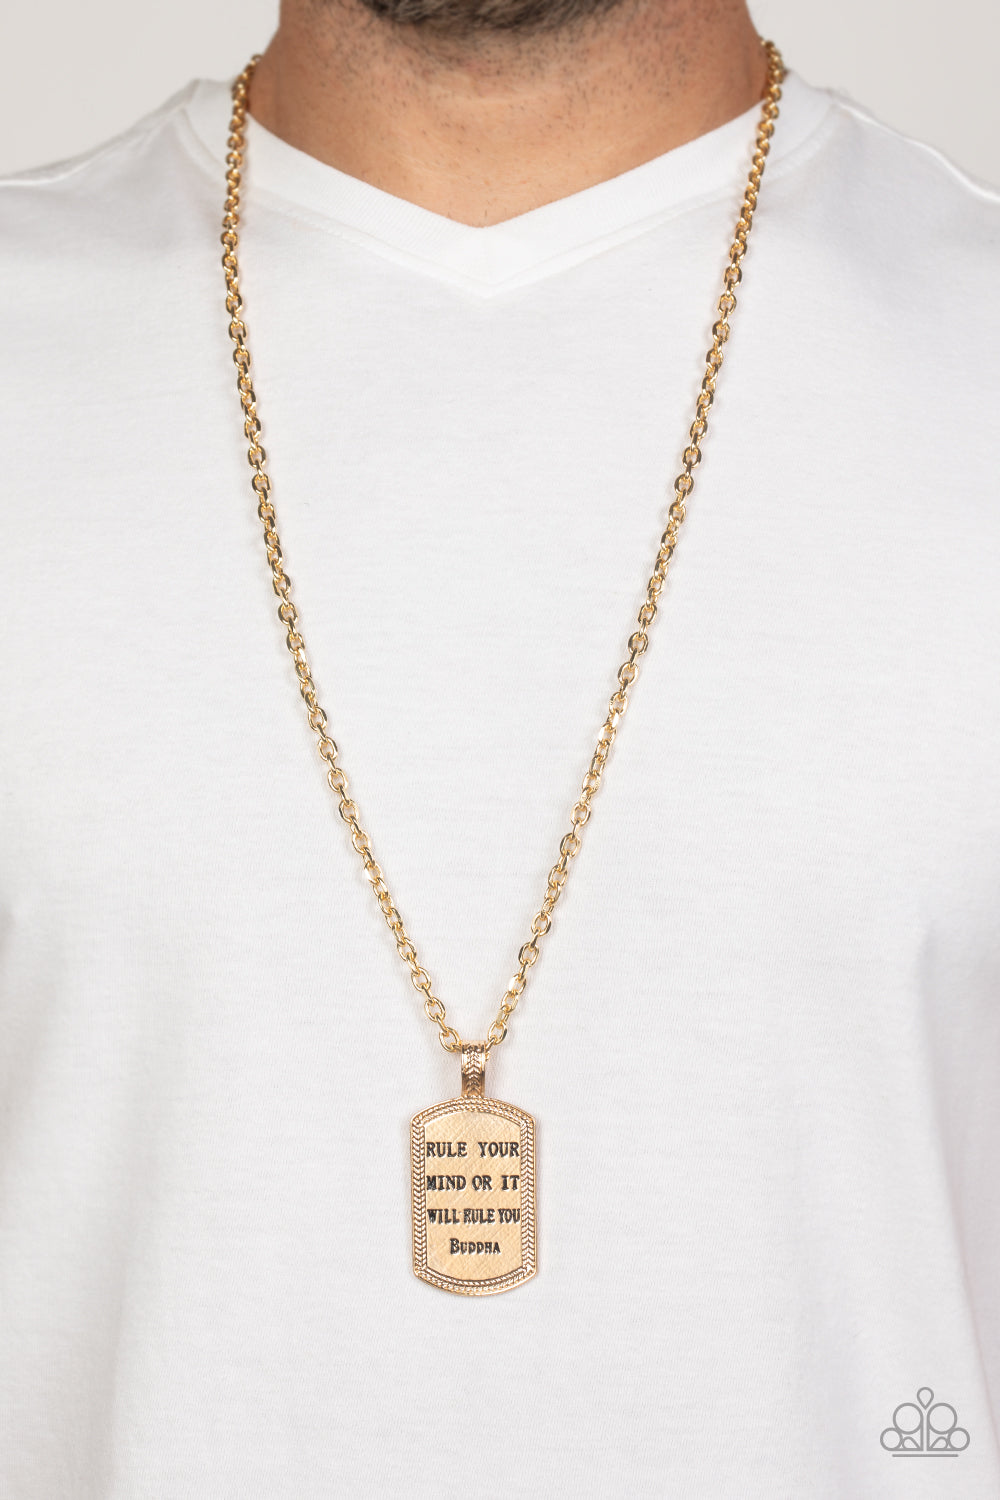 Paparazzi Accessories: Empire State of Mind - Gold Inspirational Necklace